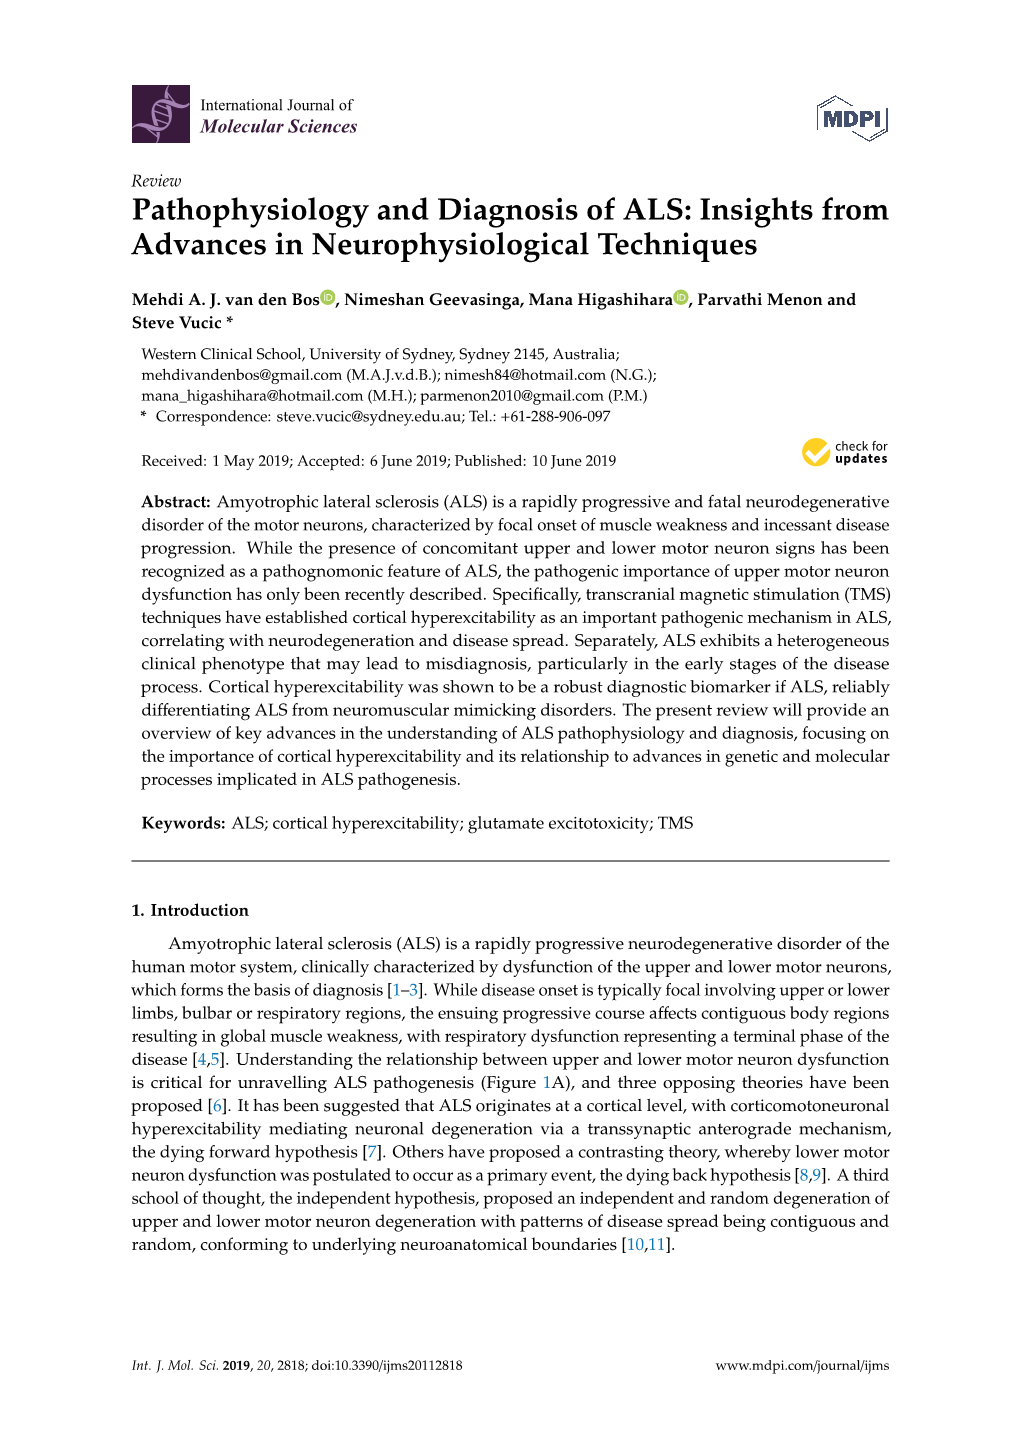 Pathophysiology and Diagnosis of ALS: Insights from Advances in Neurophysiological Techniques